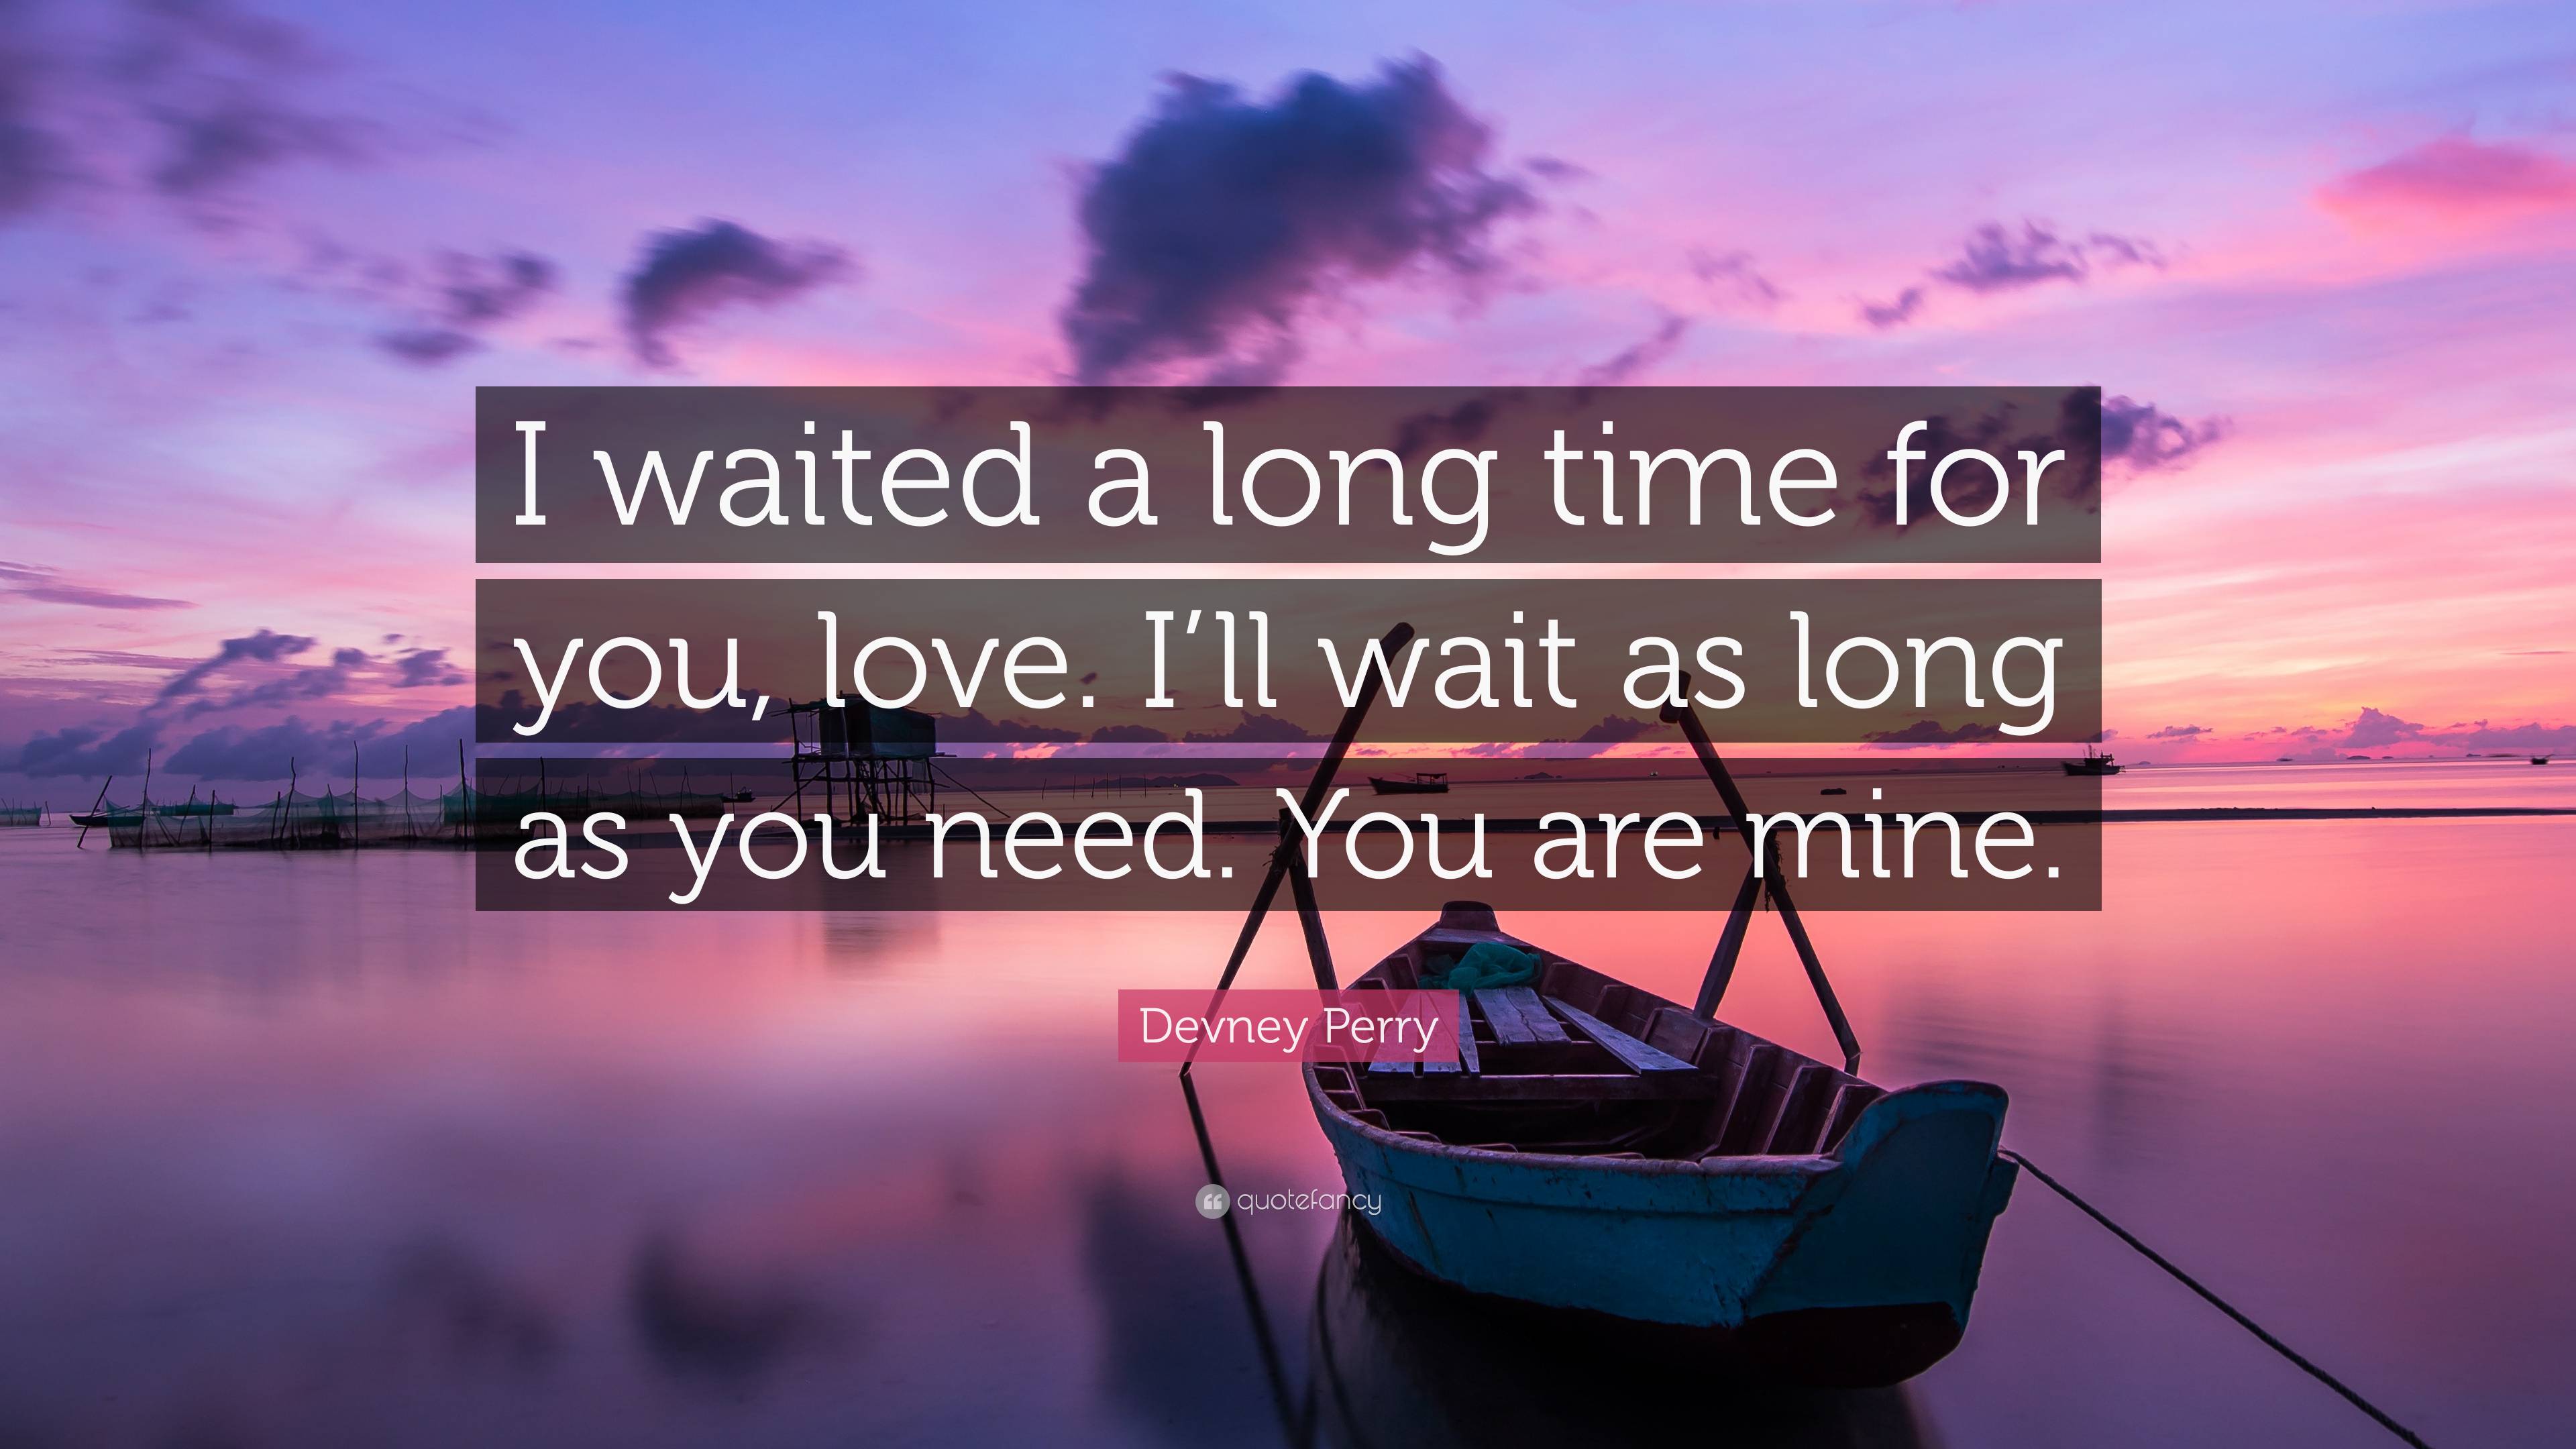 Devney Perry Quote: “I waited a long time for you, love. I'll wait as long